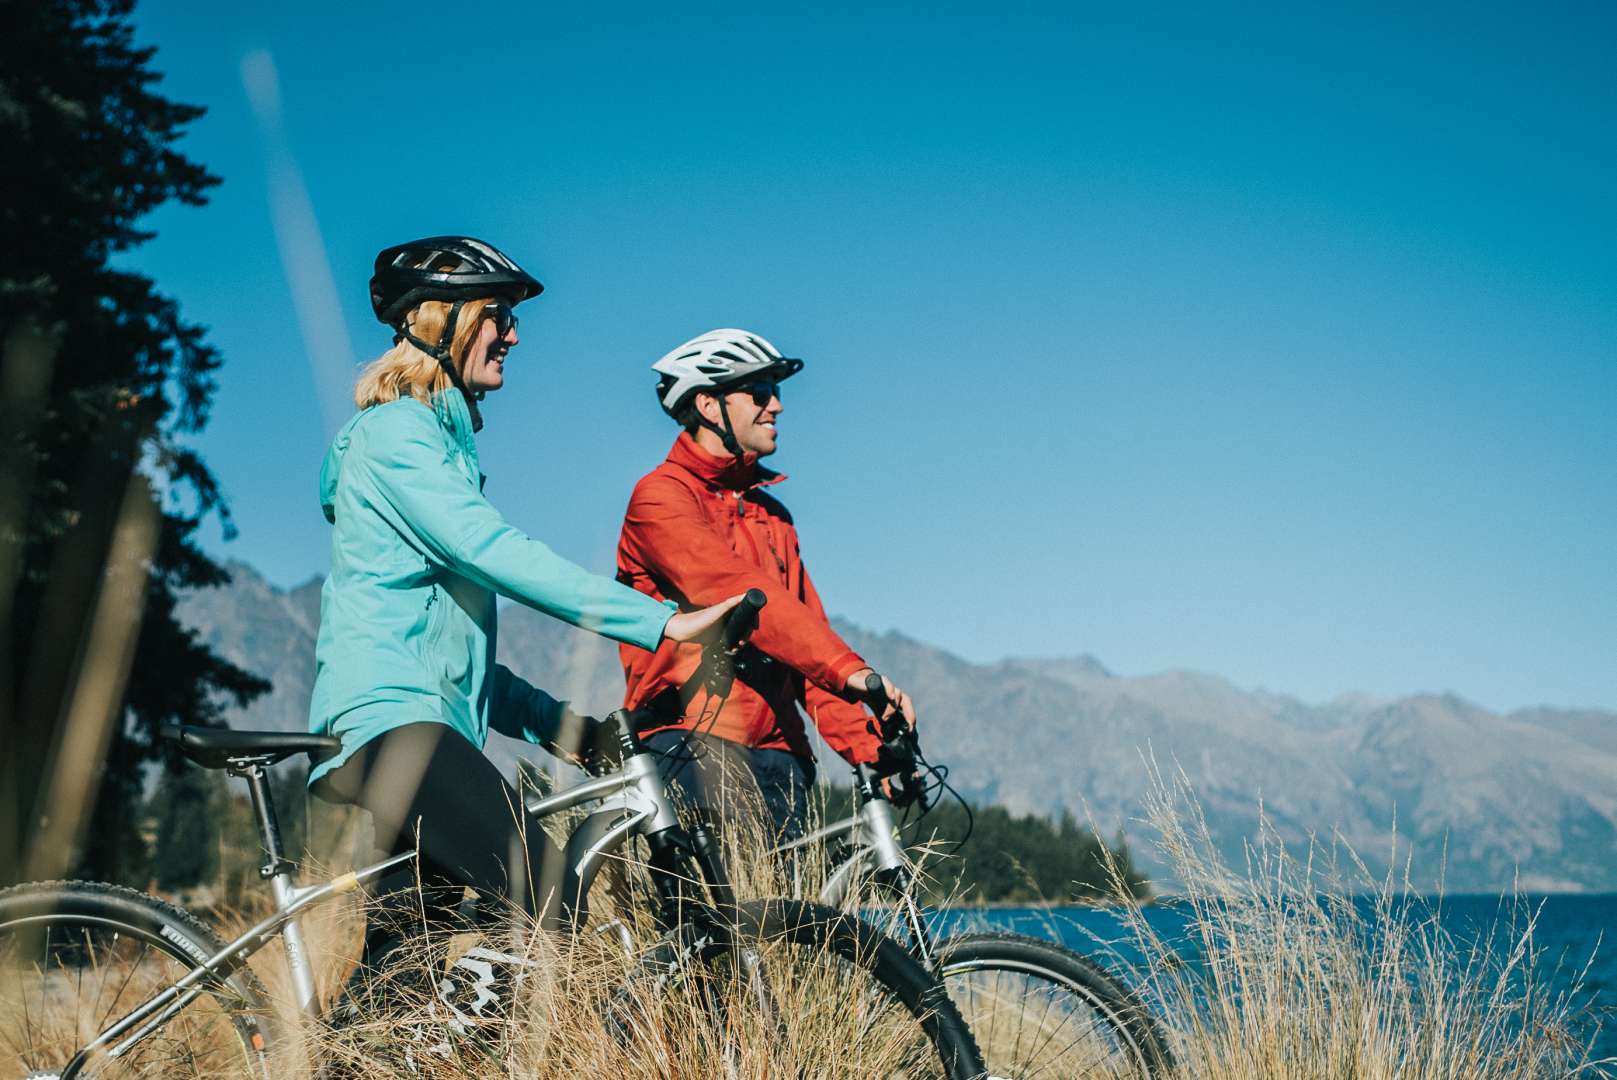 Electric Bike Hire in Queenstown for Confidence to Get Out There and Tackle the Hills With Ease